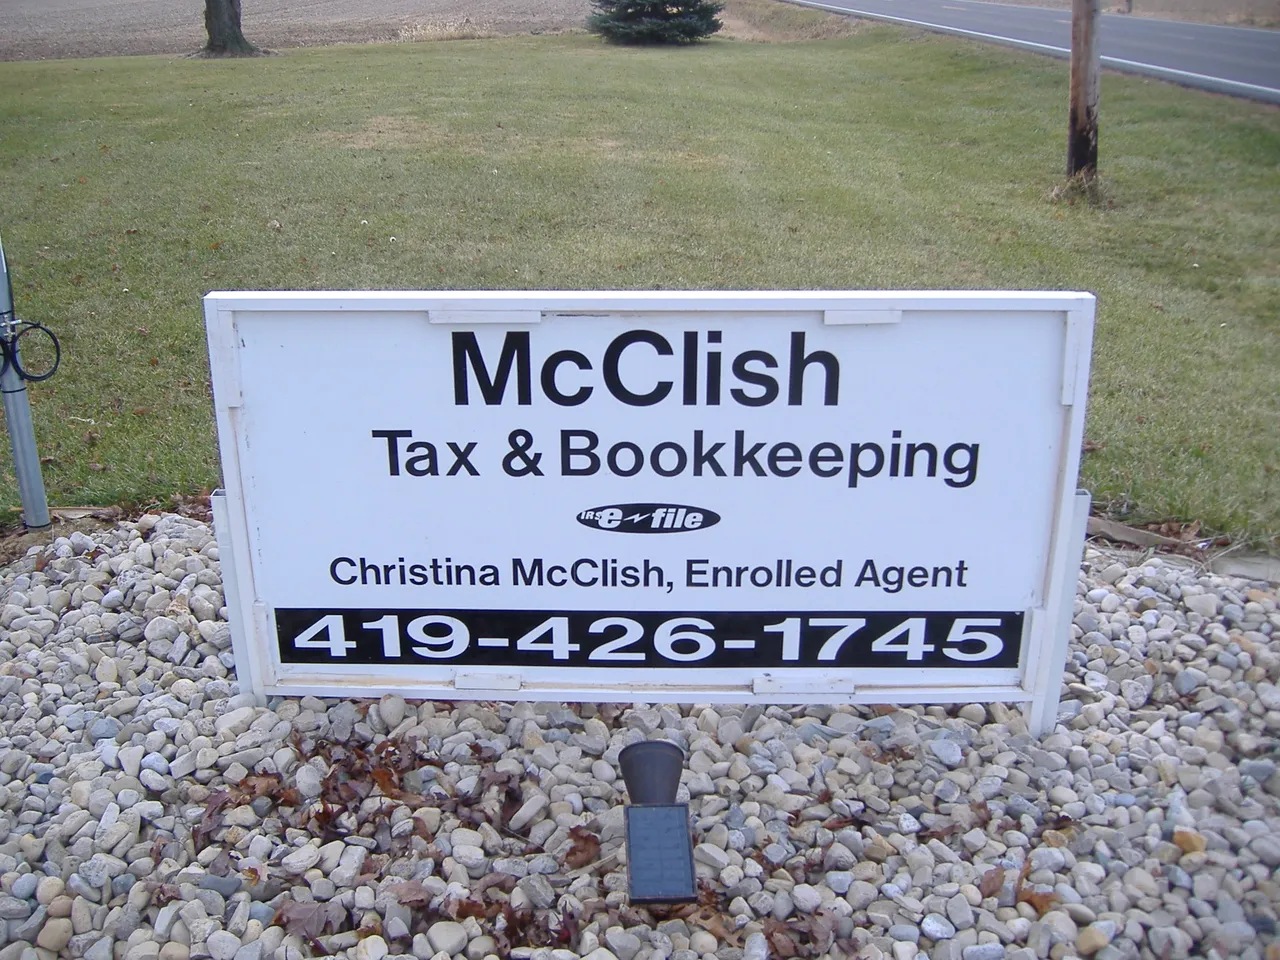 McCLish Tax & Bookkeeping sign with business name and telephone number